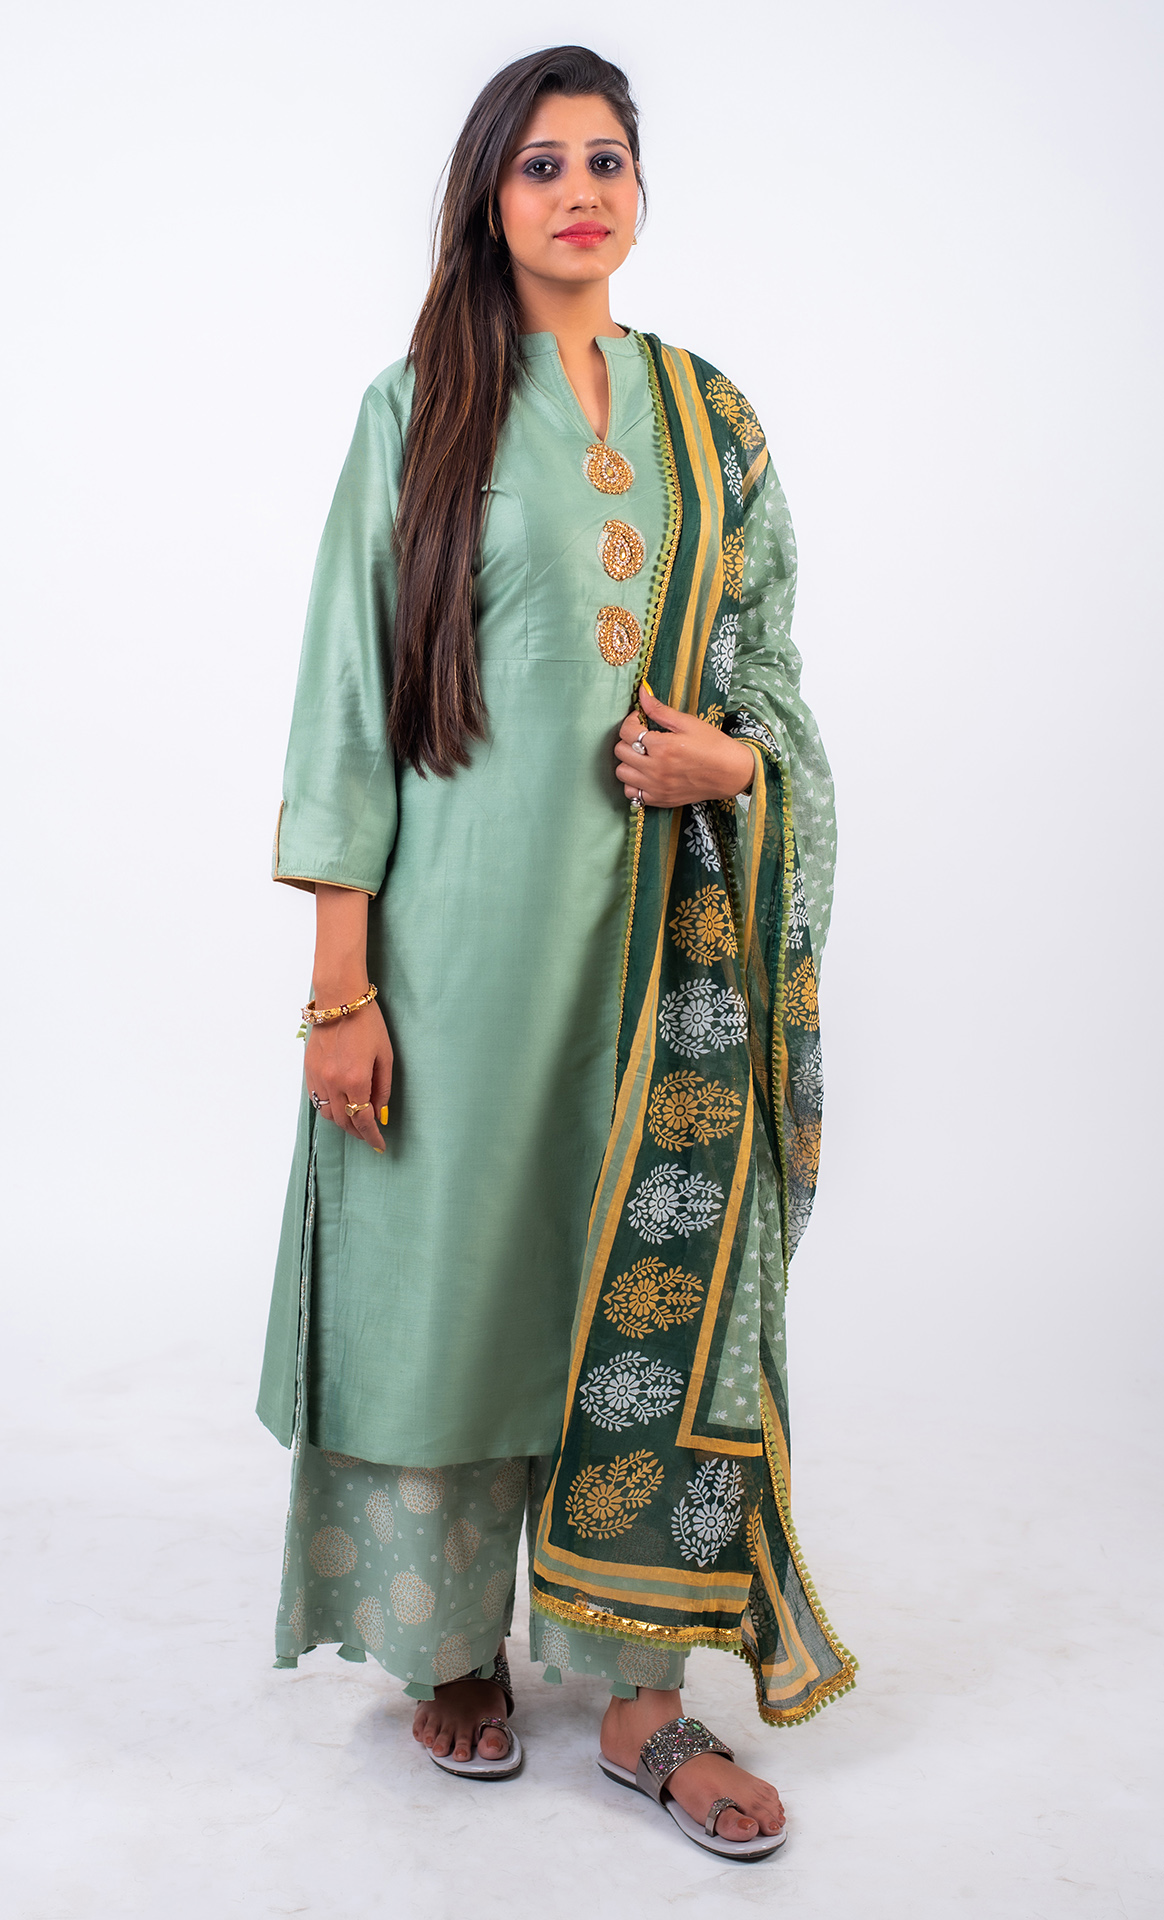 Cotton mal Fabrics Long Kurti With Dupatta In Light Green Color With  Embroidery - Sale